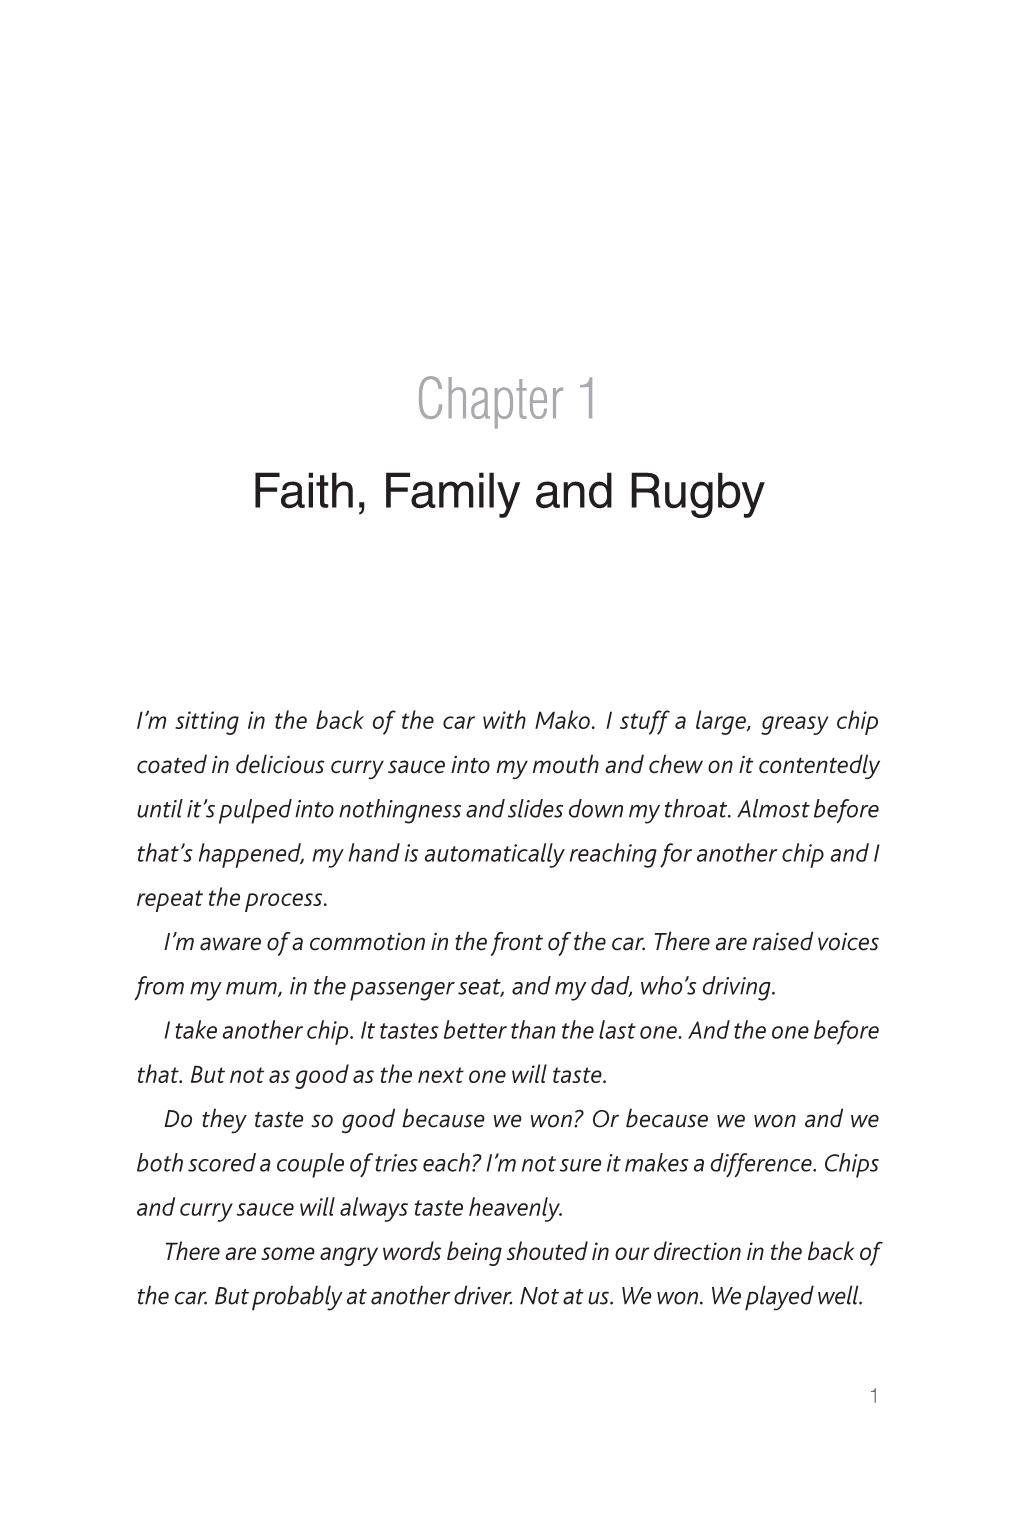 Chapter 1 Faith, Family and Rugby